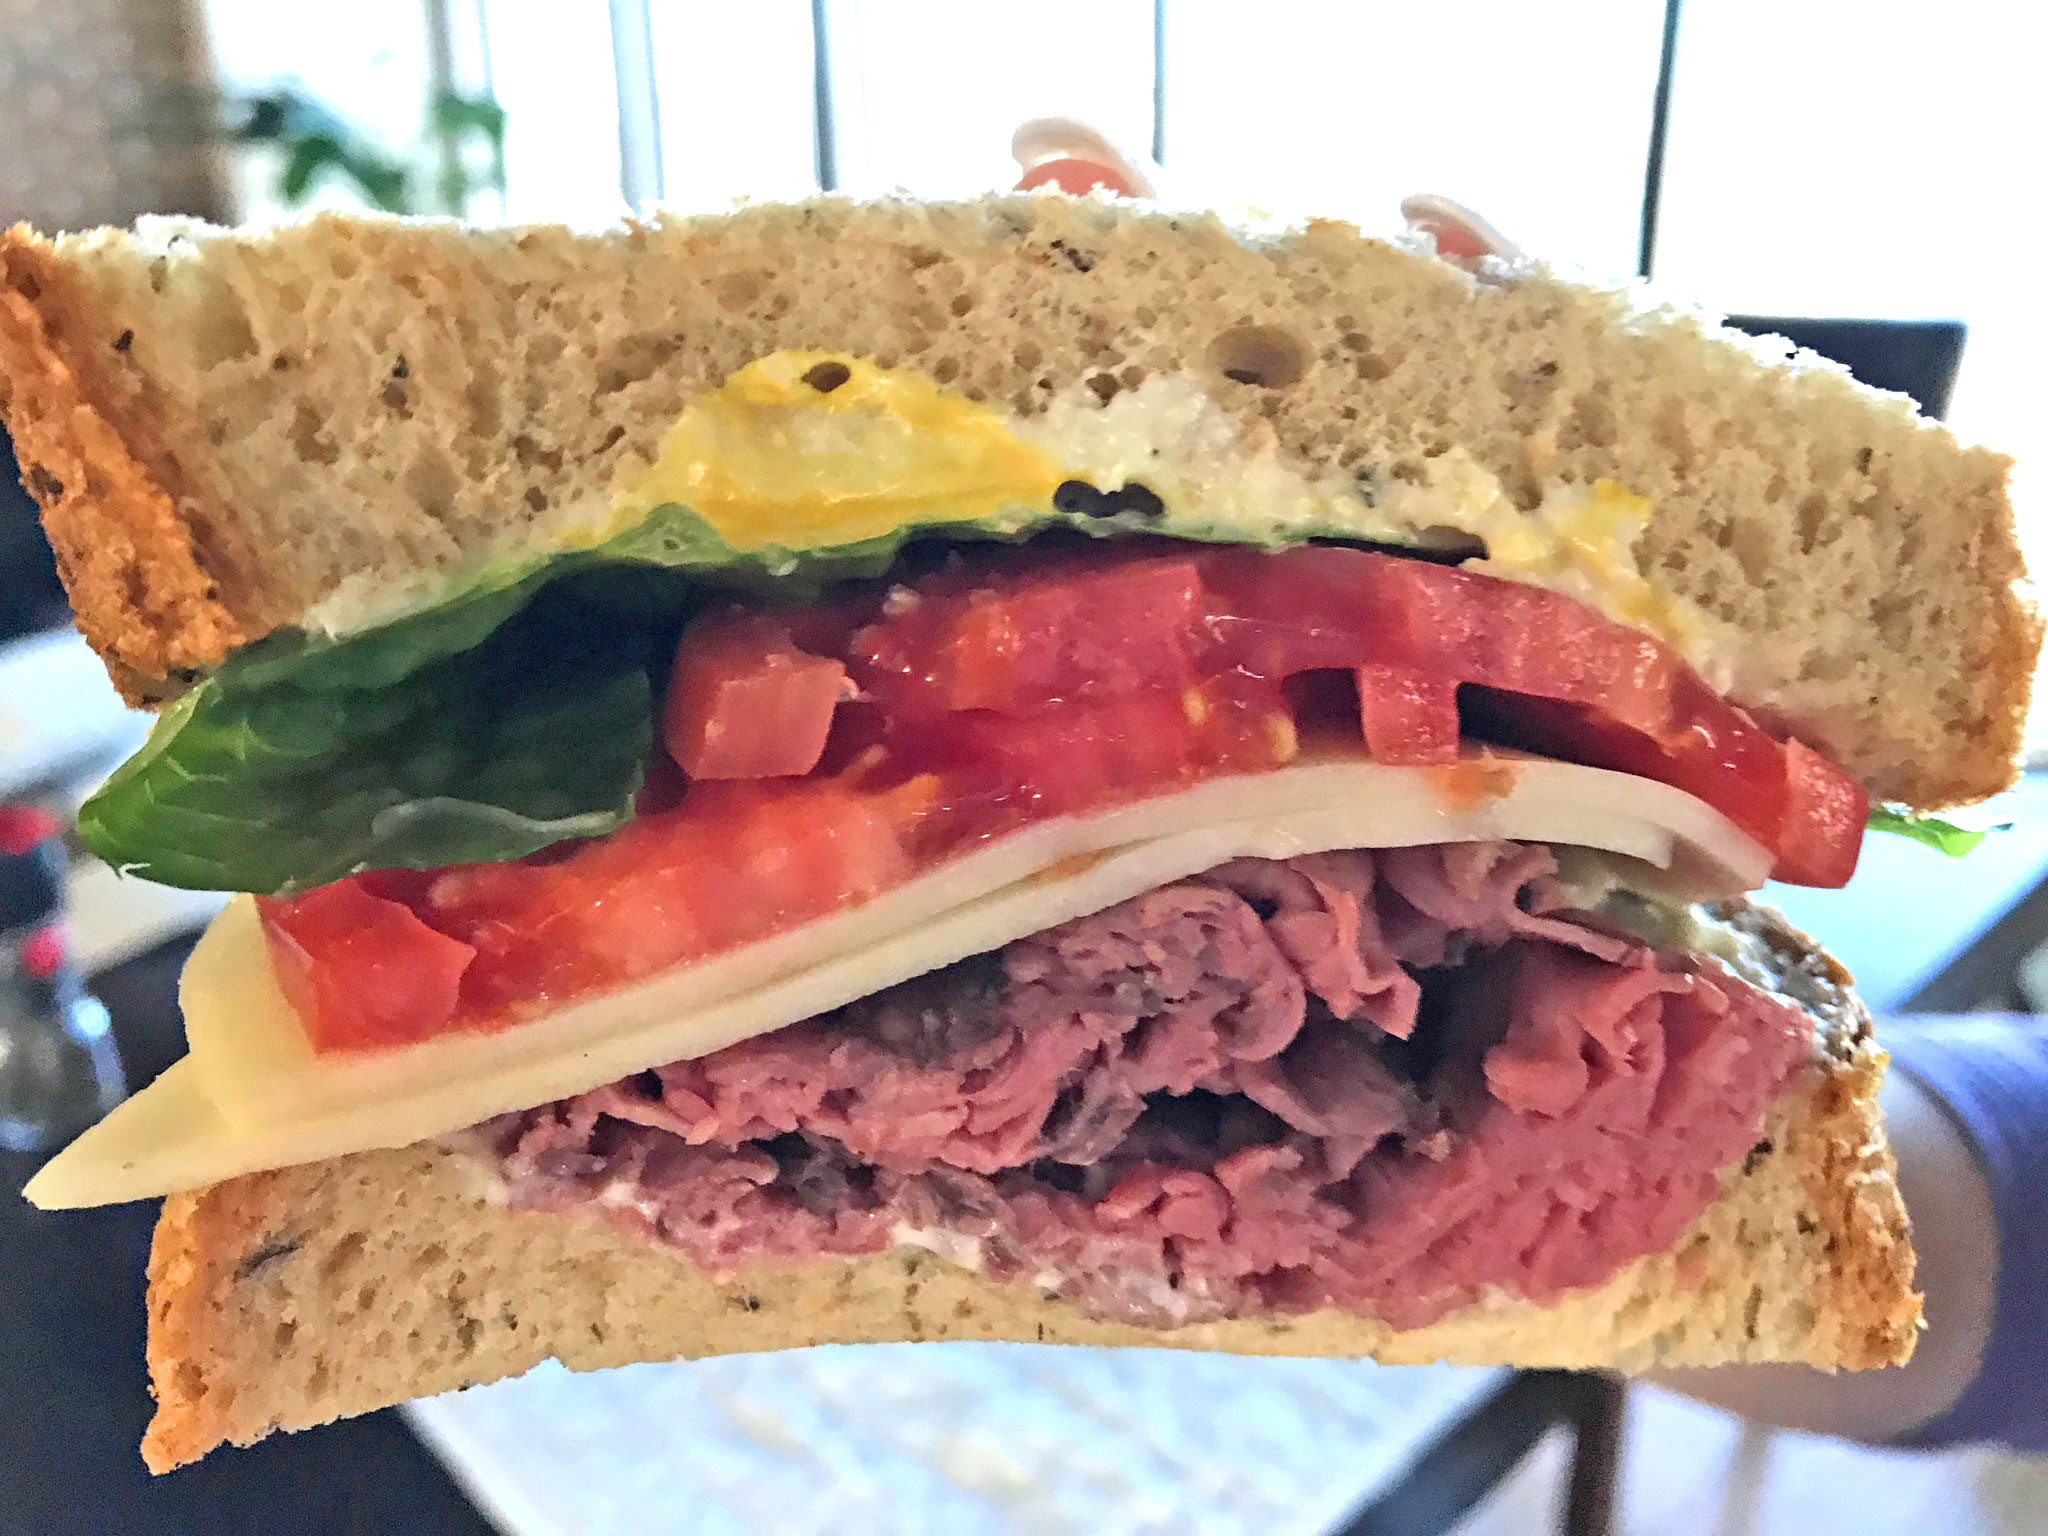 Lonnies - Roast Beef with added tomato, provolone and mustard